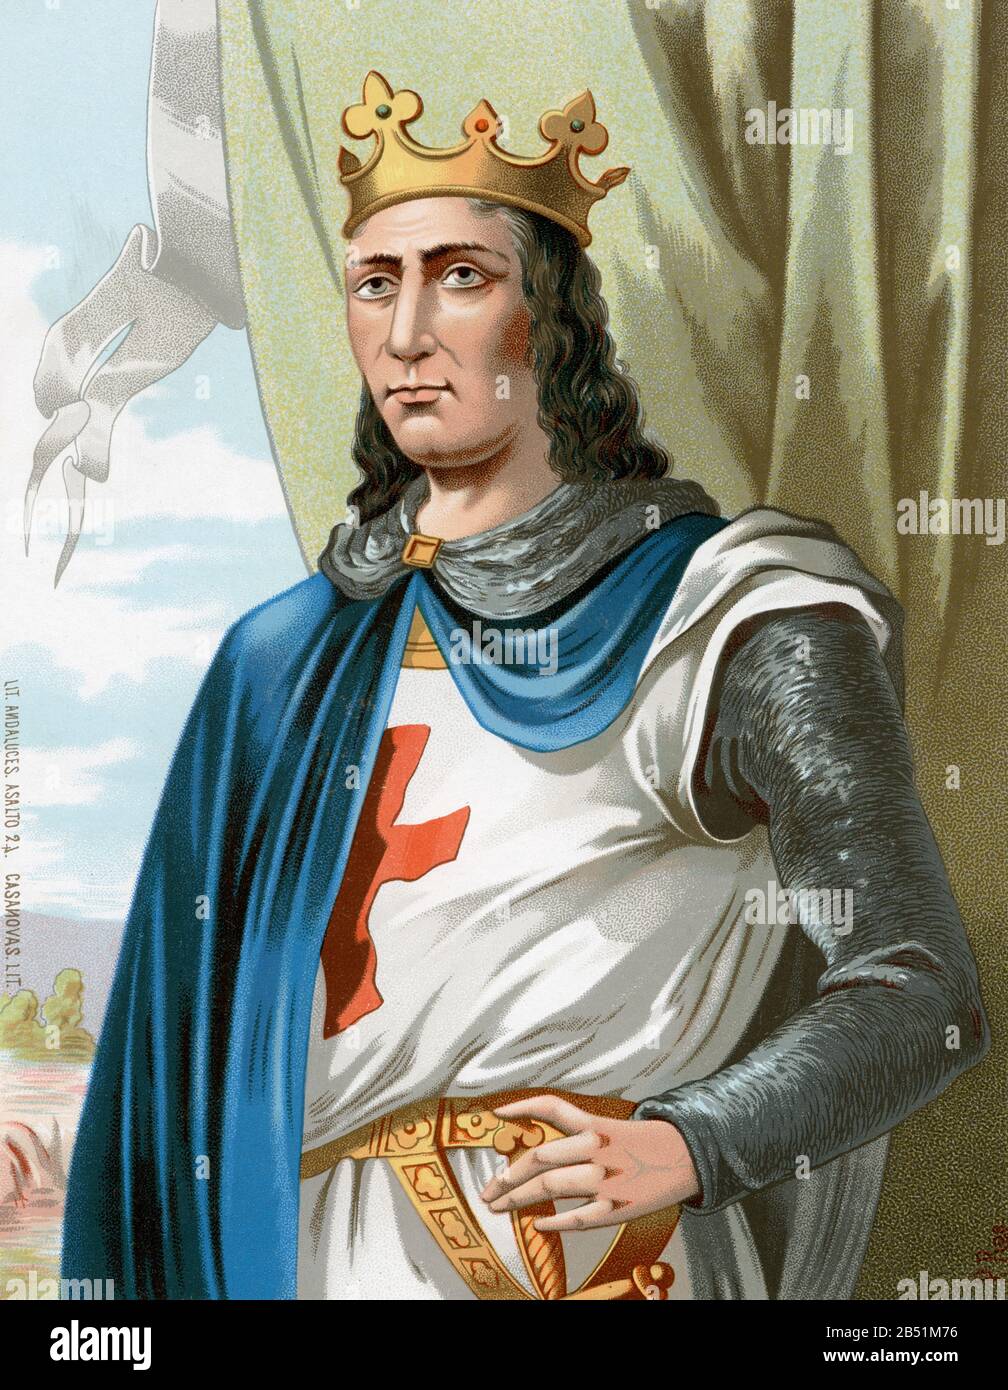 Old color lithography portrait. Louis IX the Saint (1215 - 1270). King of France from 1226 to 1270. House of Capet, Direct Capetians or House of Franc Stock Photo